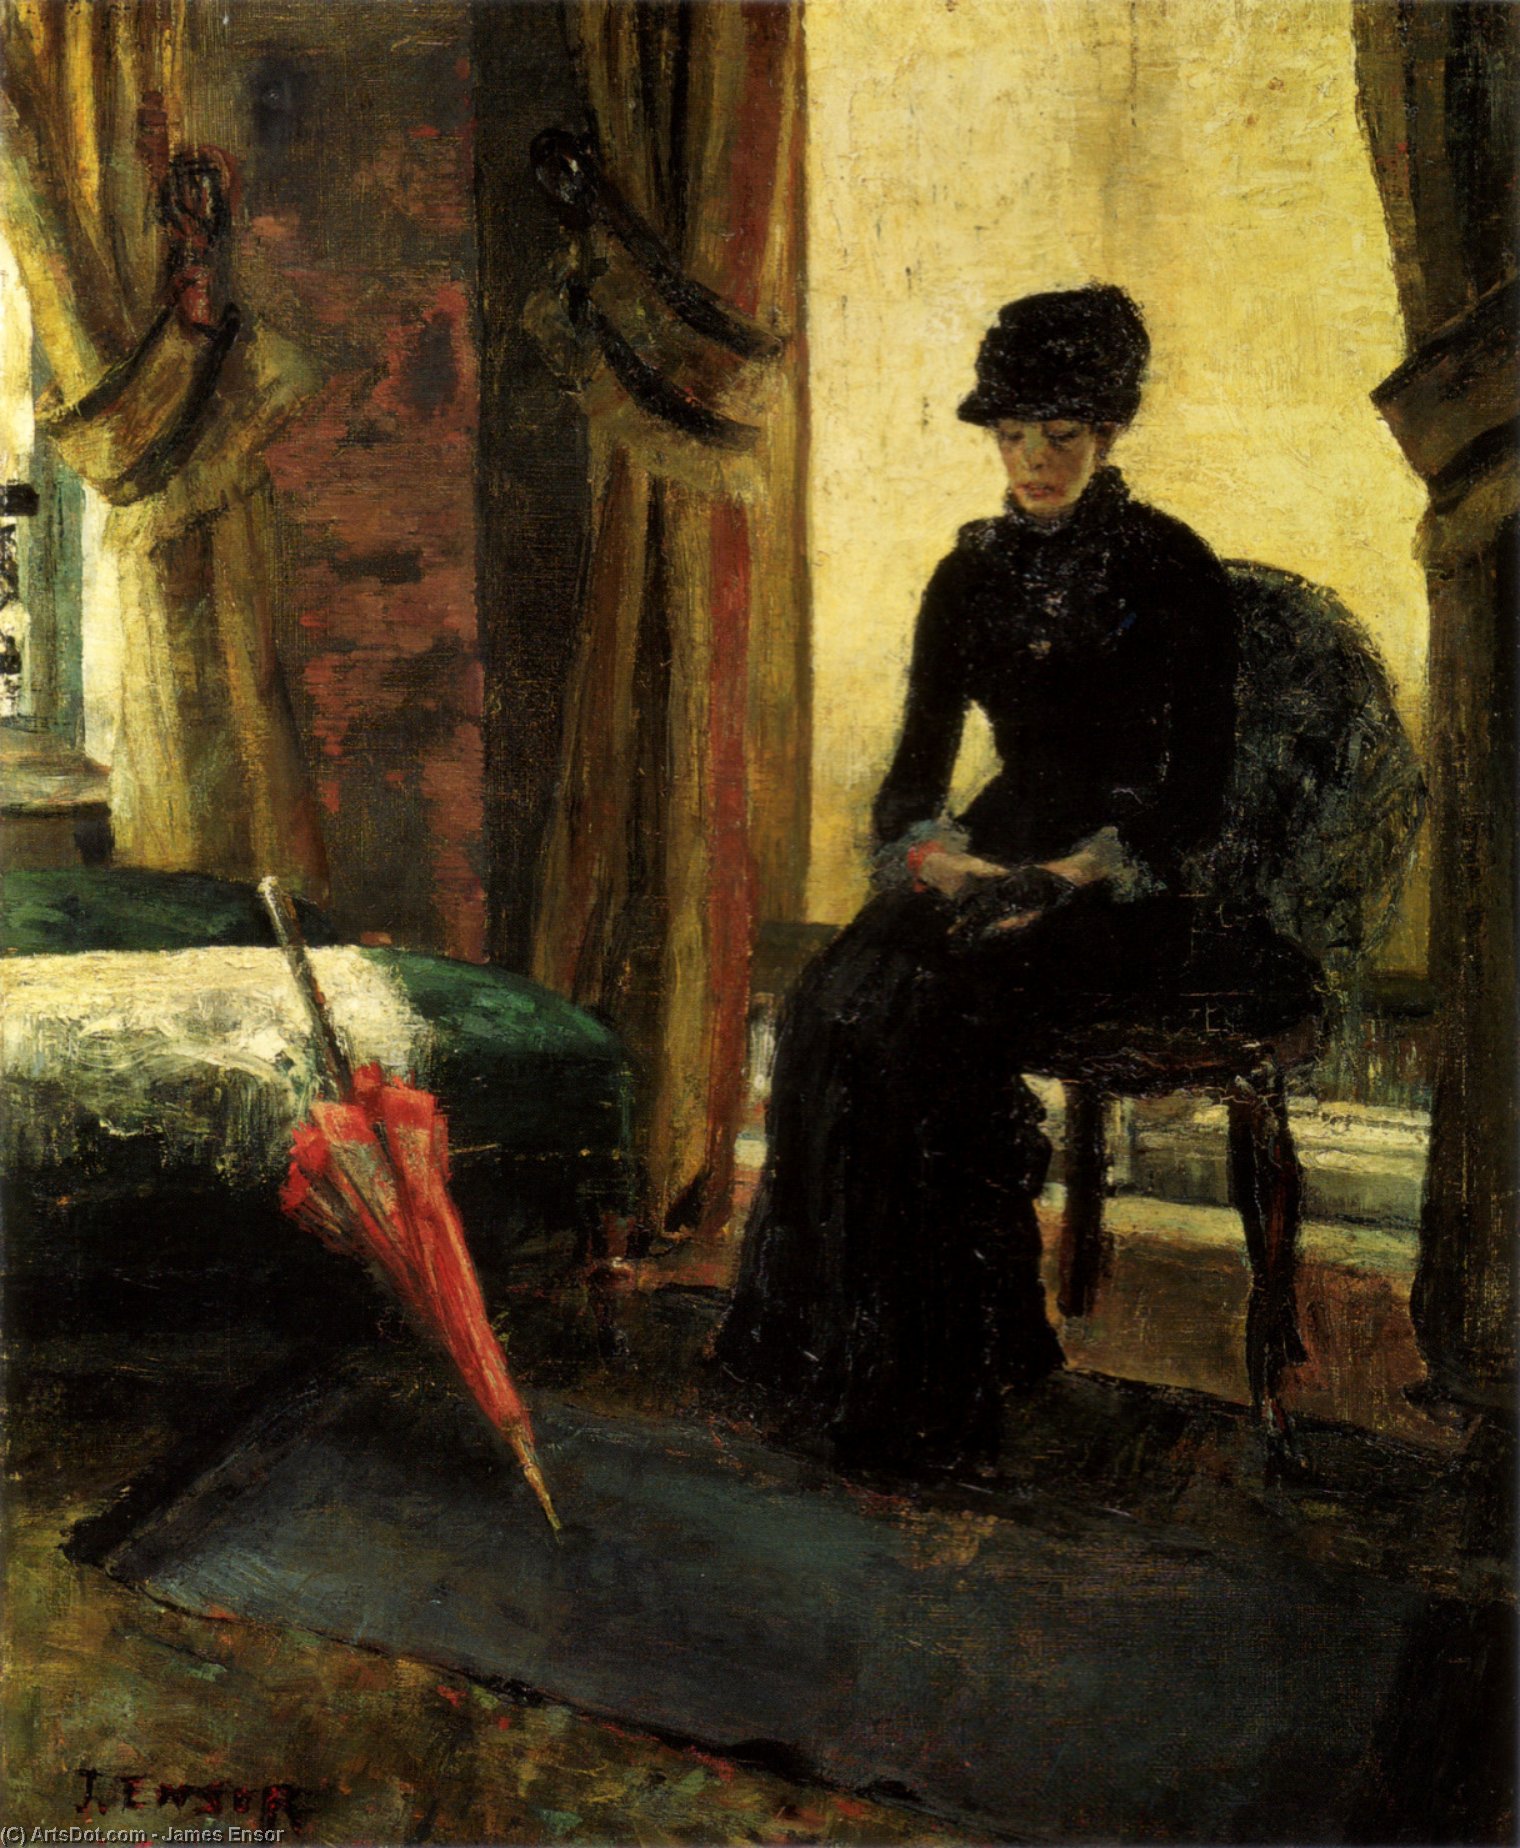 Buy Museum Art Reproductions The Somber Lady (The Lady in Black) by James Ensor (1860-1949, Belgium) | ArtsDot.com